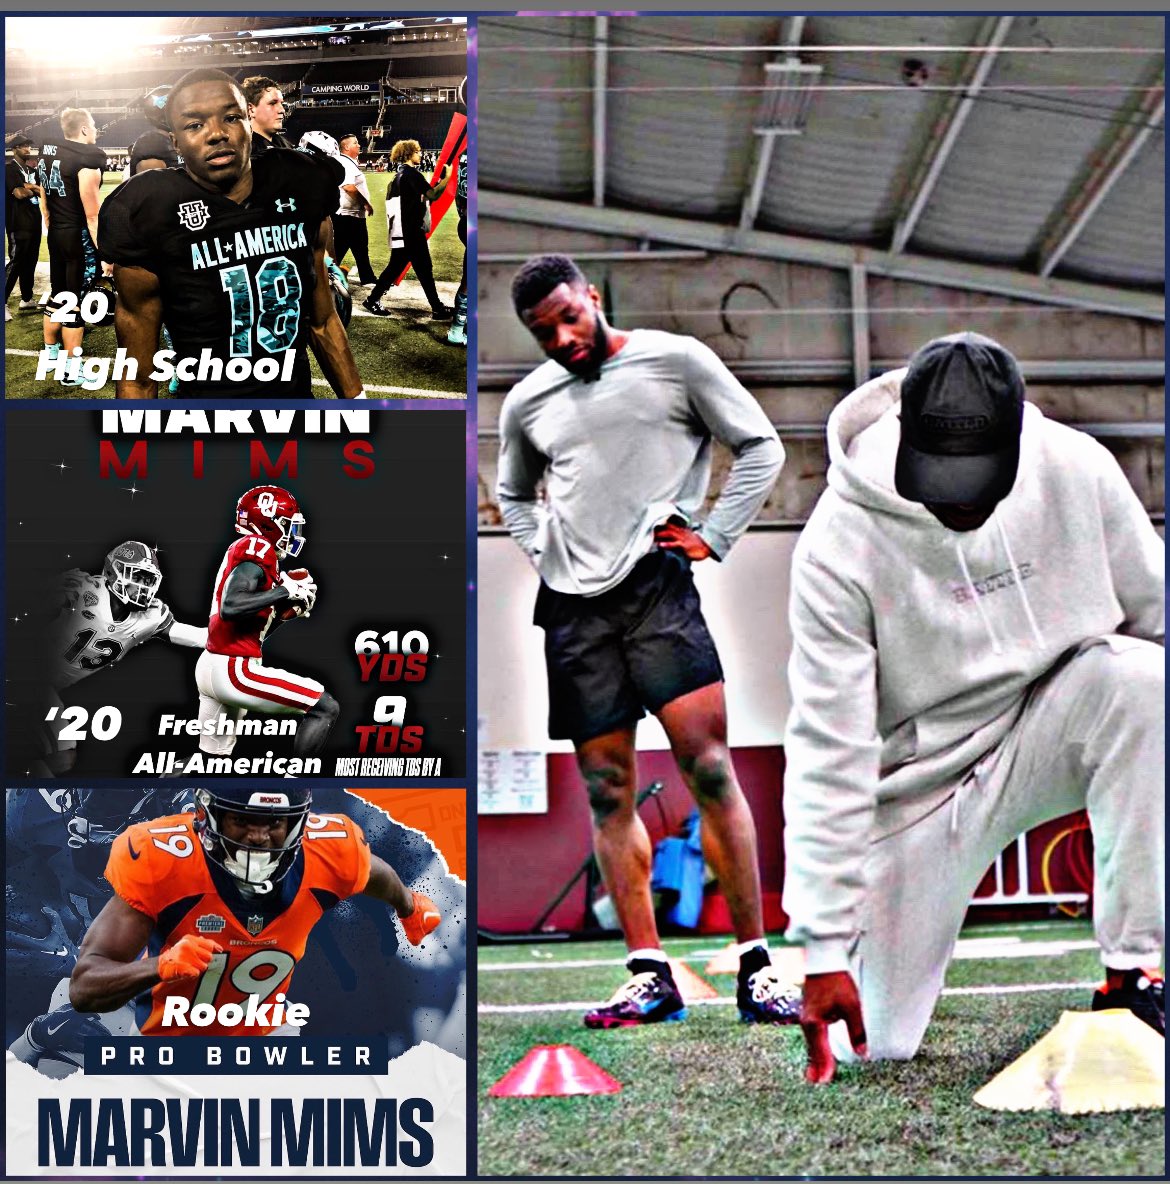 The word “Levels” is used quite a bit… is this the definition⁉️@marvindmims #UAAllAmerican #TrueFreshmanAllAmerican #RookieProBowler 
#CoachHooksTrained